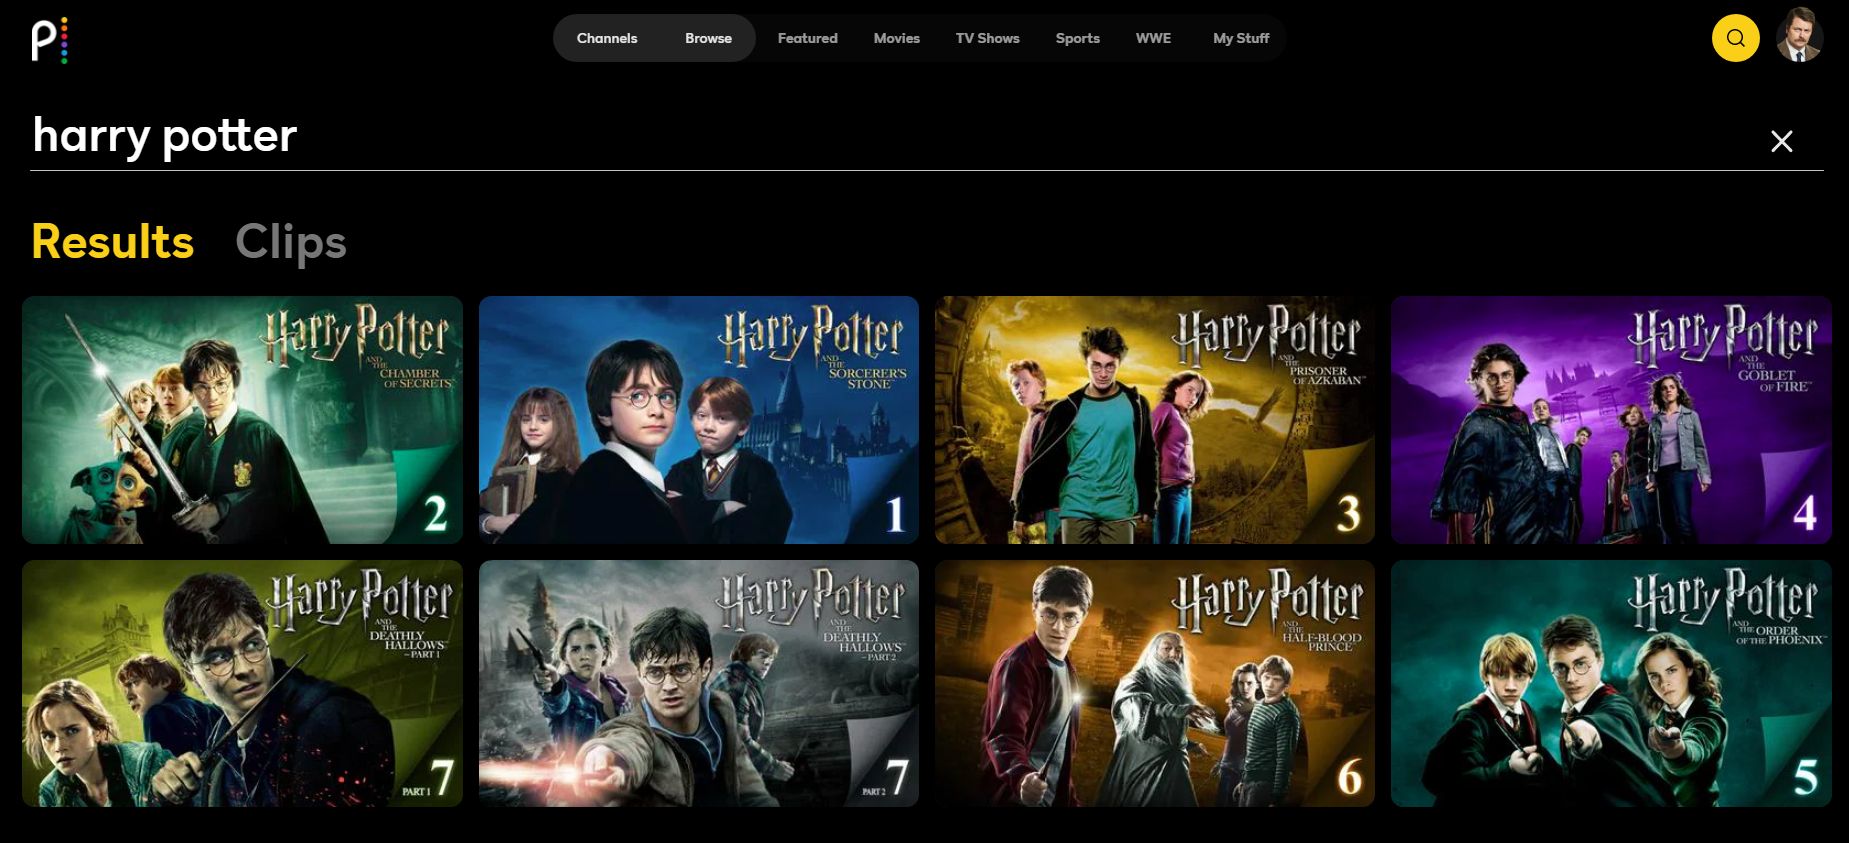 How To Watch Harry Potter Movies For Free